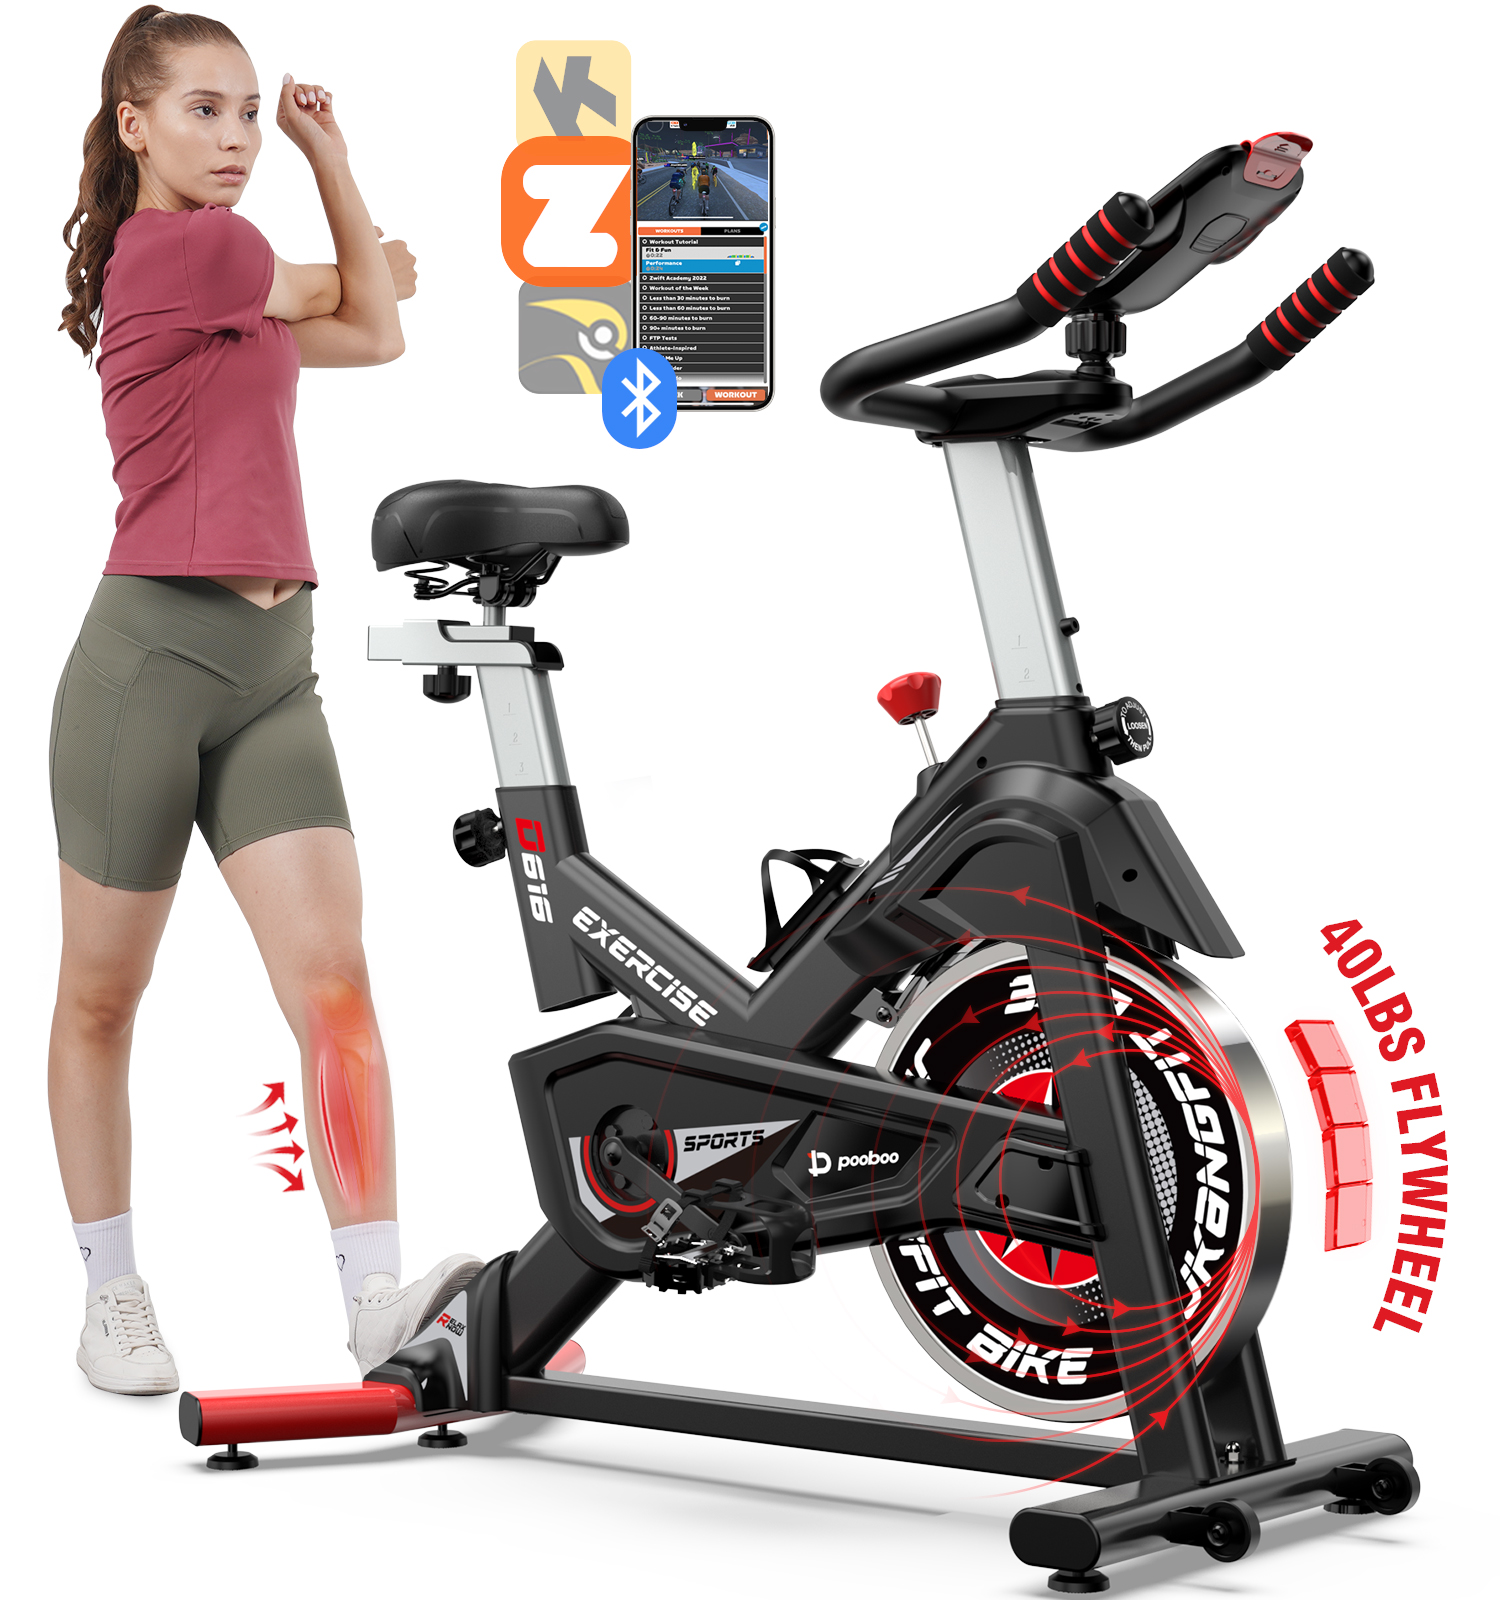 POOBOO Indoor Cycling Bike Exercise Bike Bluetooth Stationary Bike Heavy-duty Flywheel with Silent Magnetic Resistance 100 Levels for Home Gym Exercise - image 1 of 10